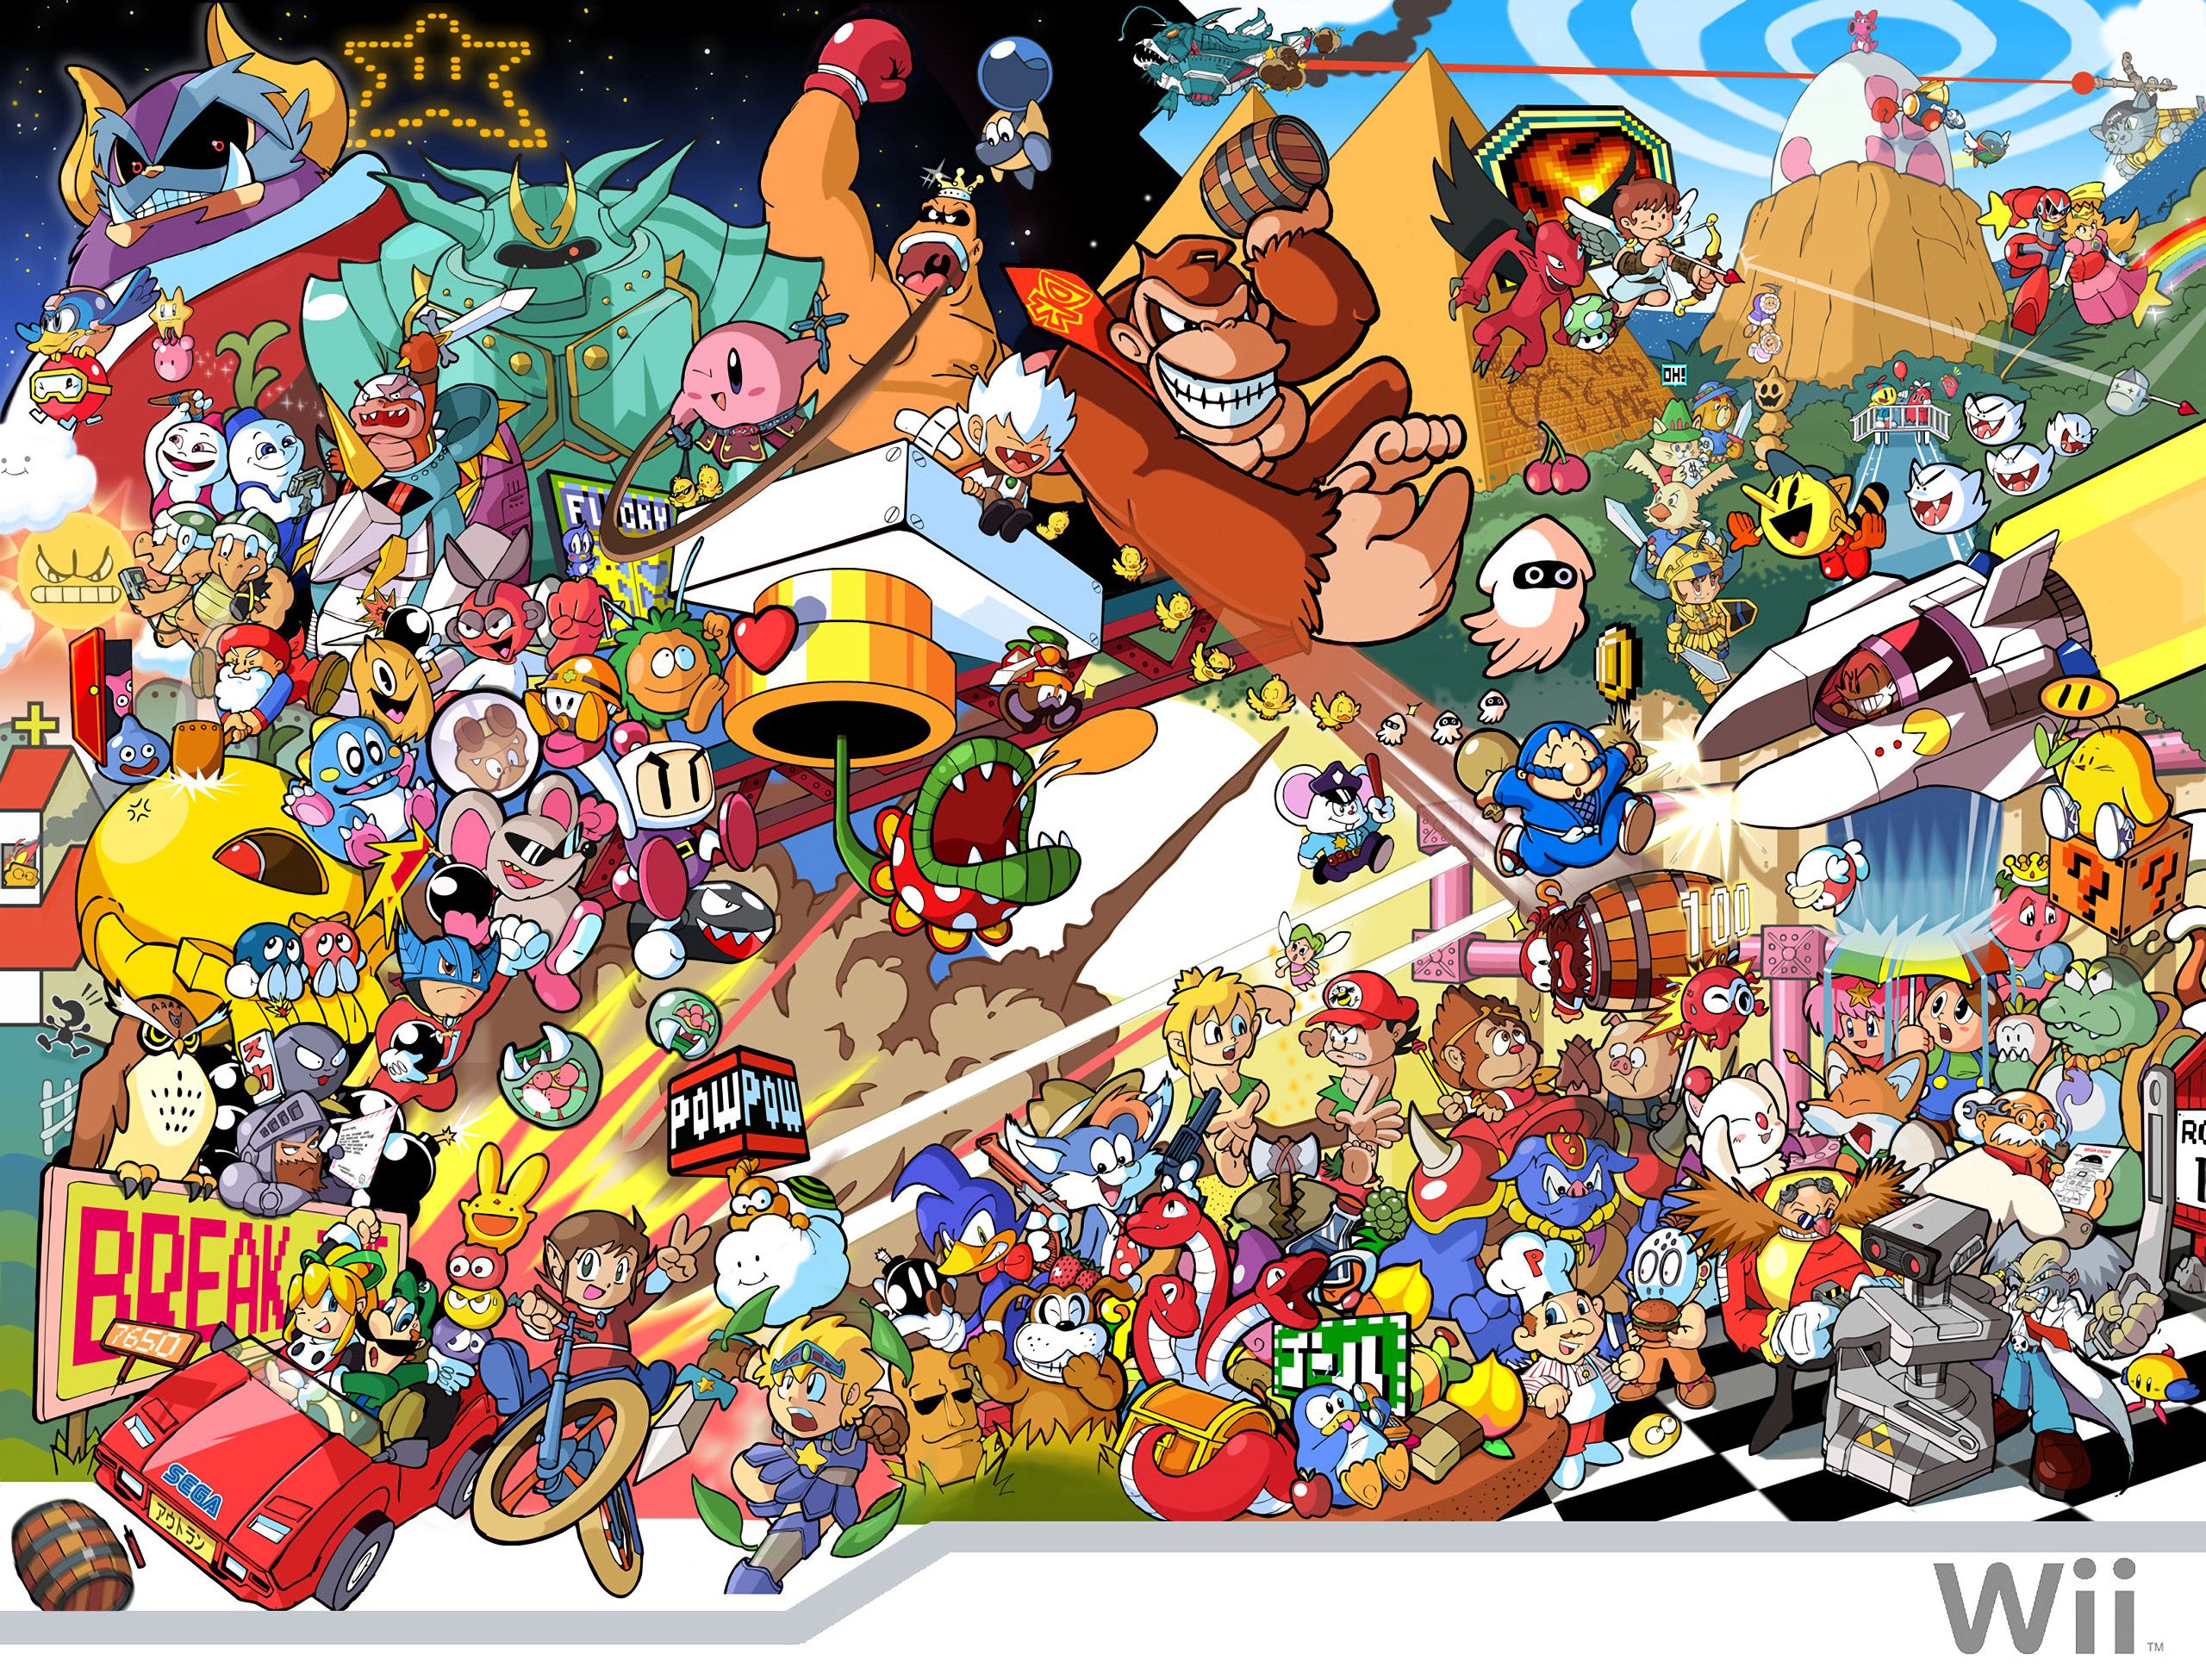 A poster of many different video game characters - Nintendo